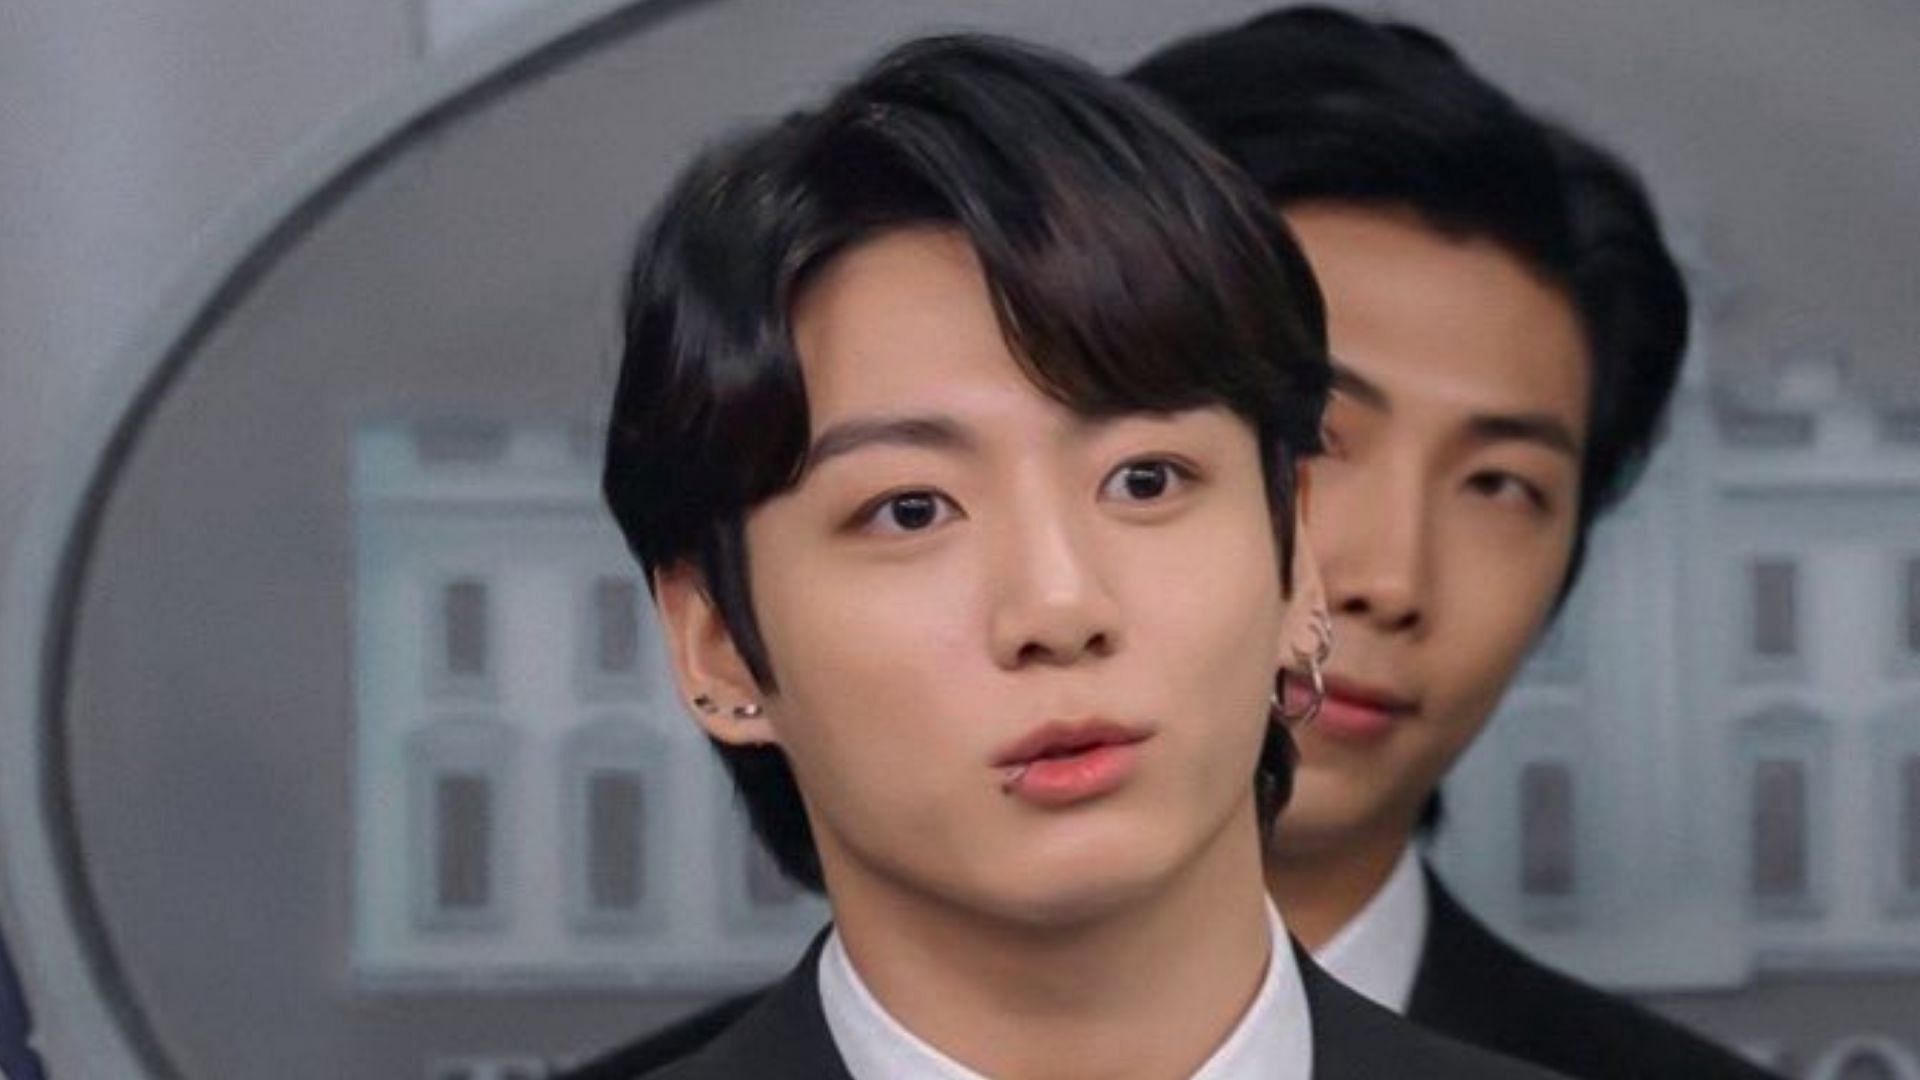 BTS Jungkook at The White House (Image via Getty)